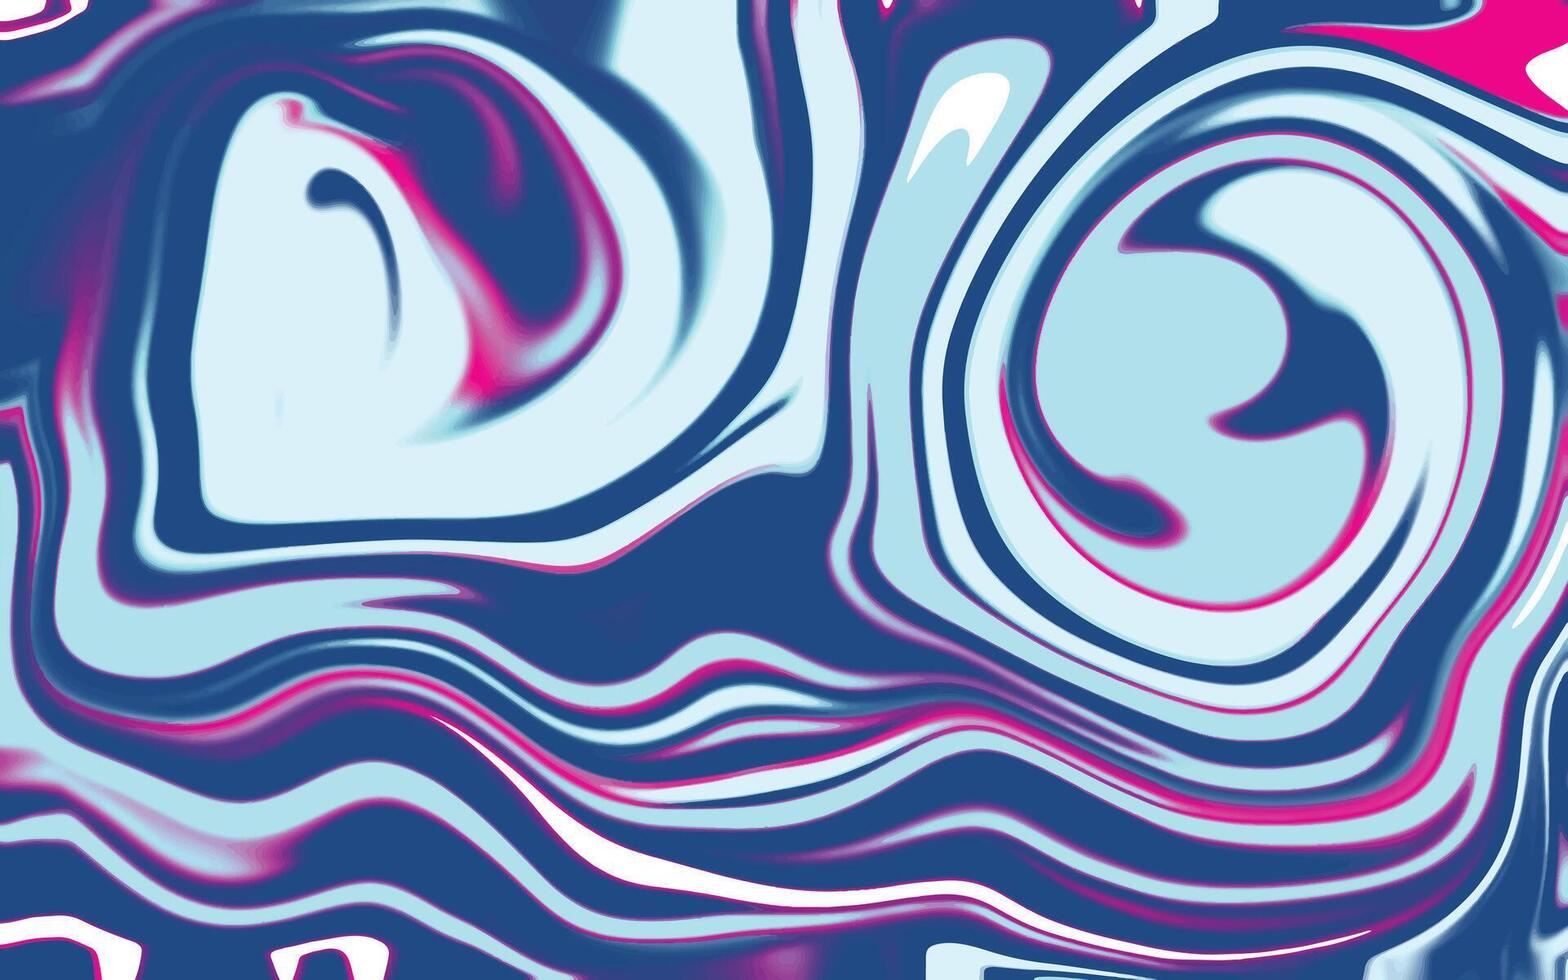 Abstract horizontal background with colorful waves. Trendy vector illustration in style retro 60s, 70s.